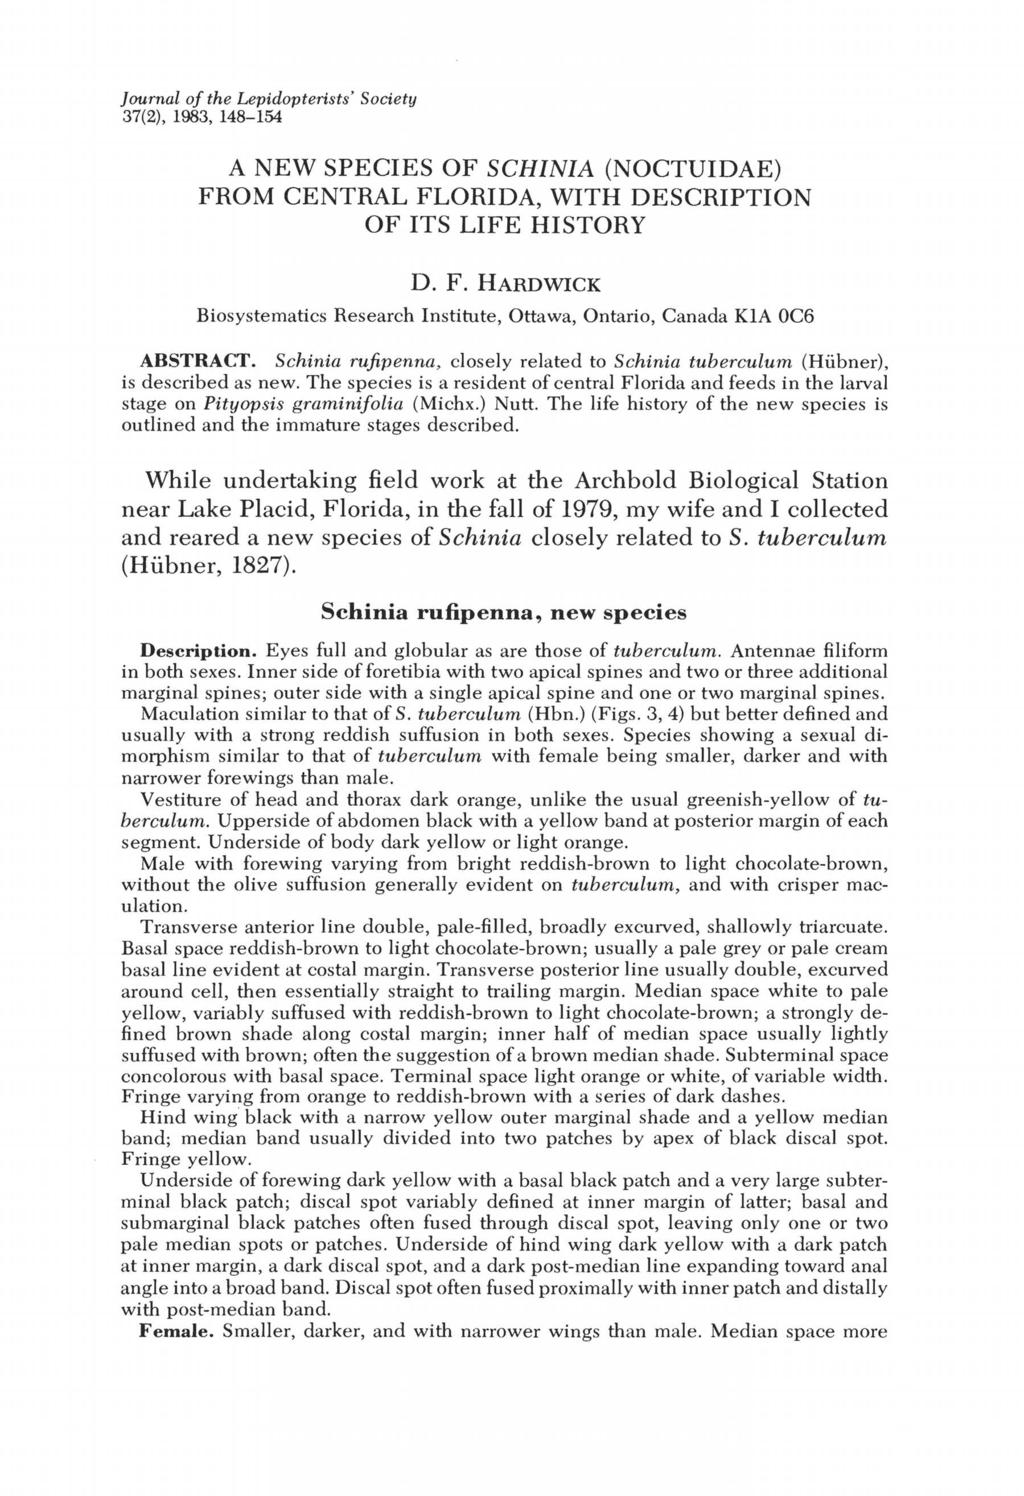 Journal of the Lepidopterists' Society 37(2), 1983, 148-154 A NEW SPECIES OF SCHINIA (NOCTUIDAE) FROM CENTRAL FLORIDA, WITH DESCRIPTION OF ITS LIFE HISTORY D. F. HARDWICK Biosystematics Research Institute, Ottawa, Ontario, Canada KIA OC6 ABSTRACT.